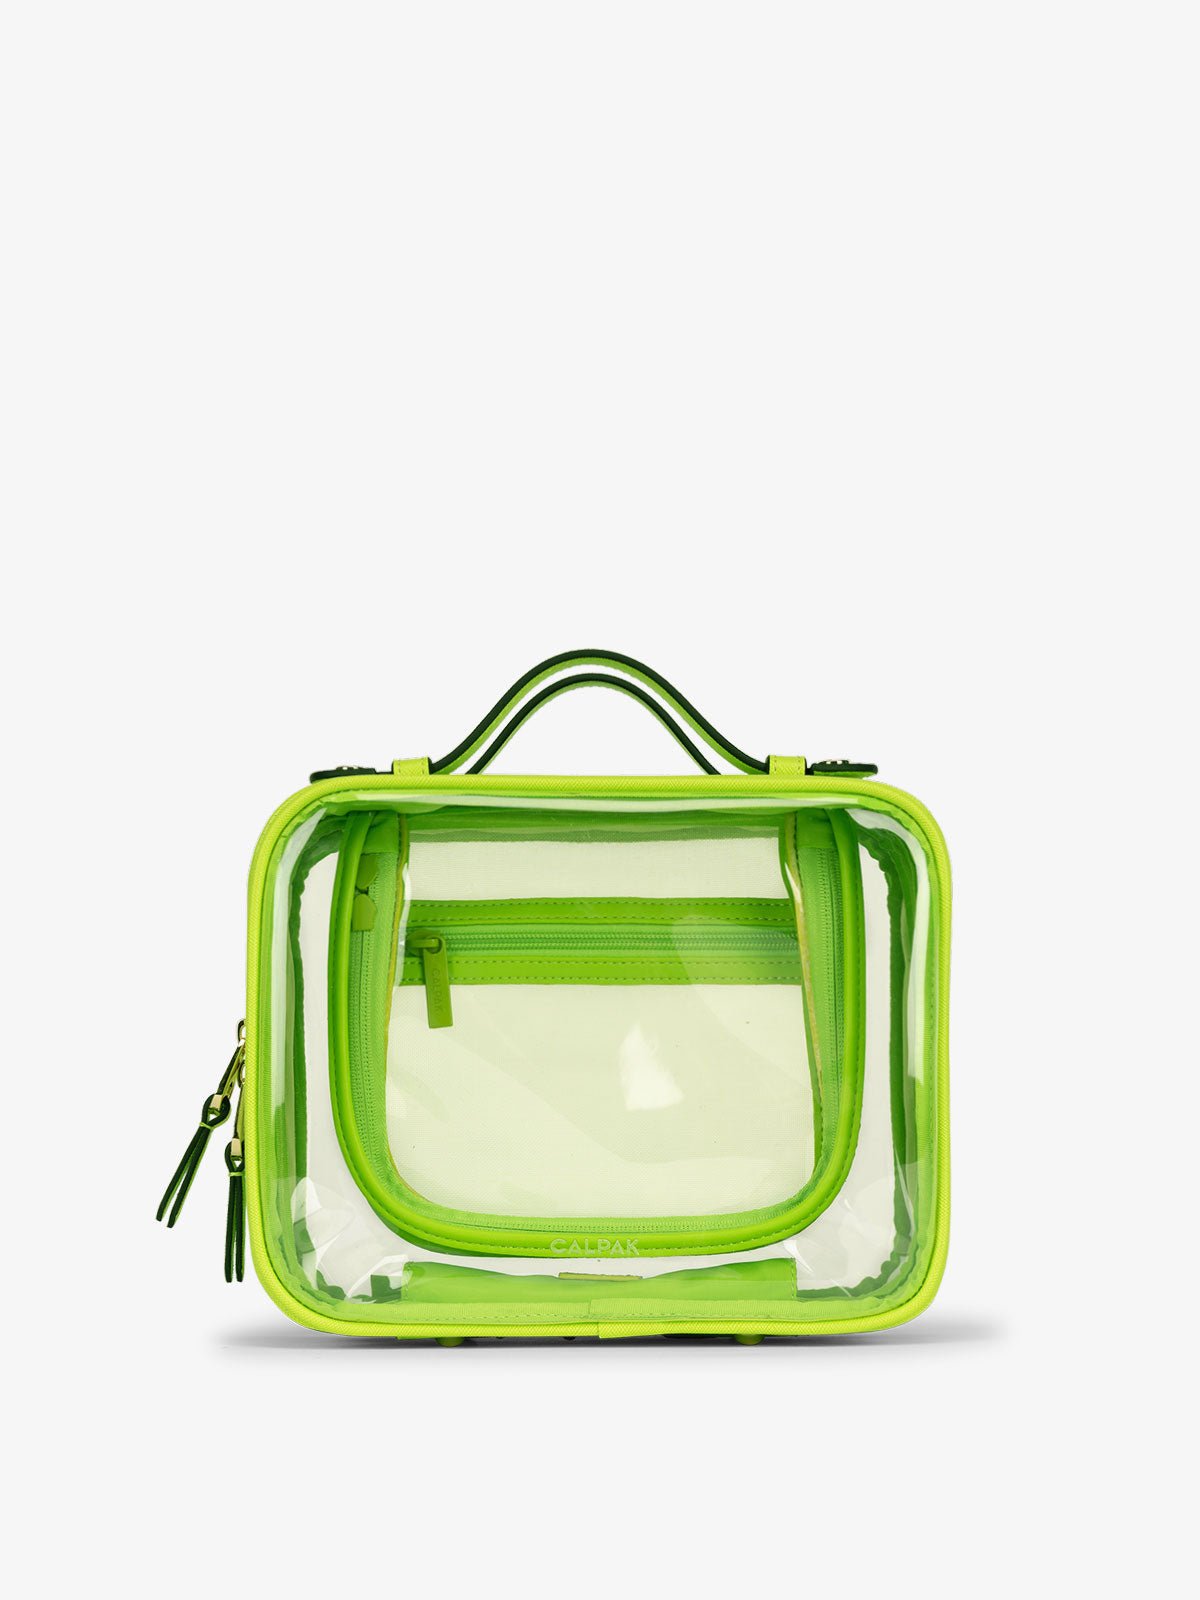 CALPAK Medium clear makeup bag with compartments in electric lime